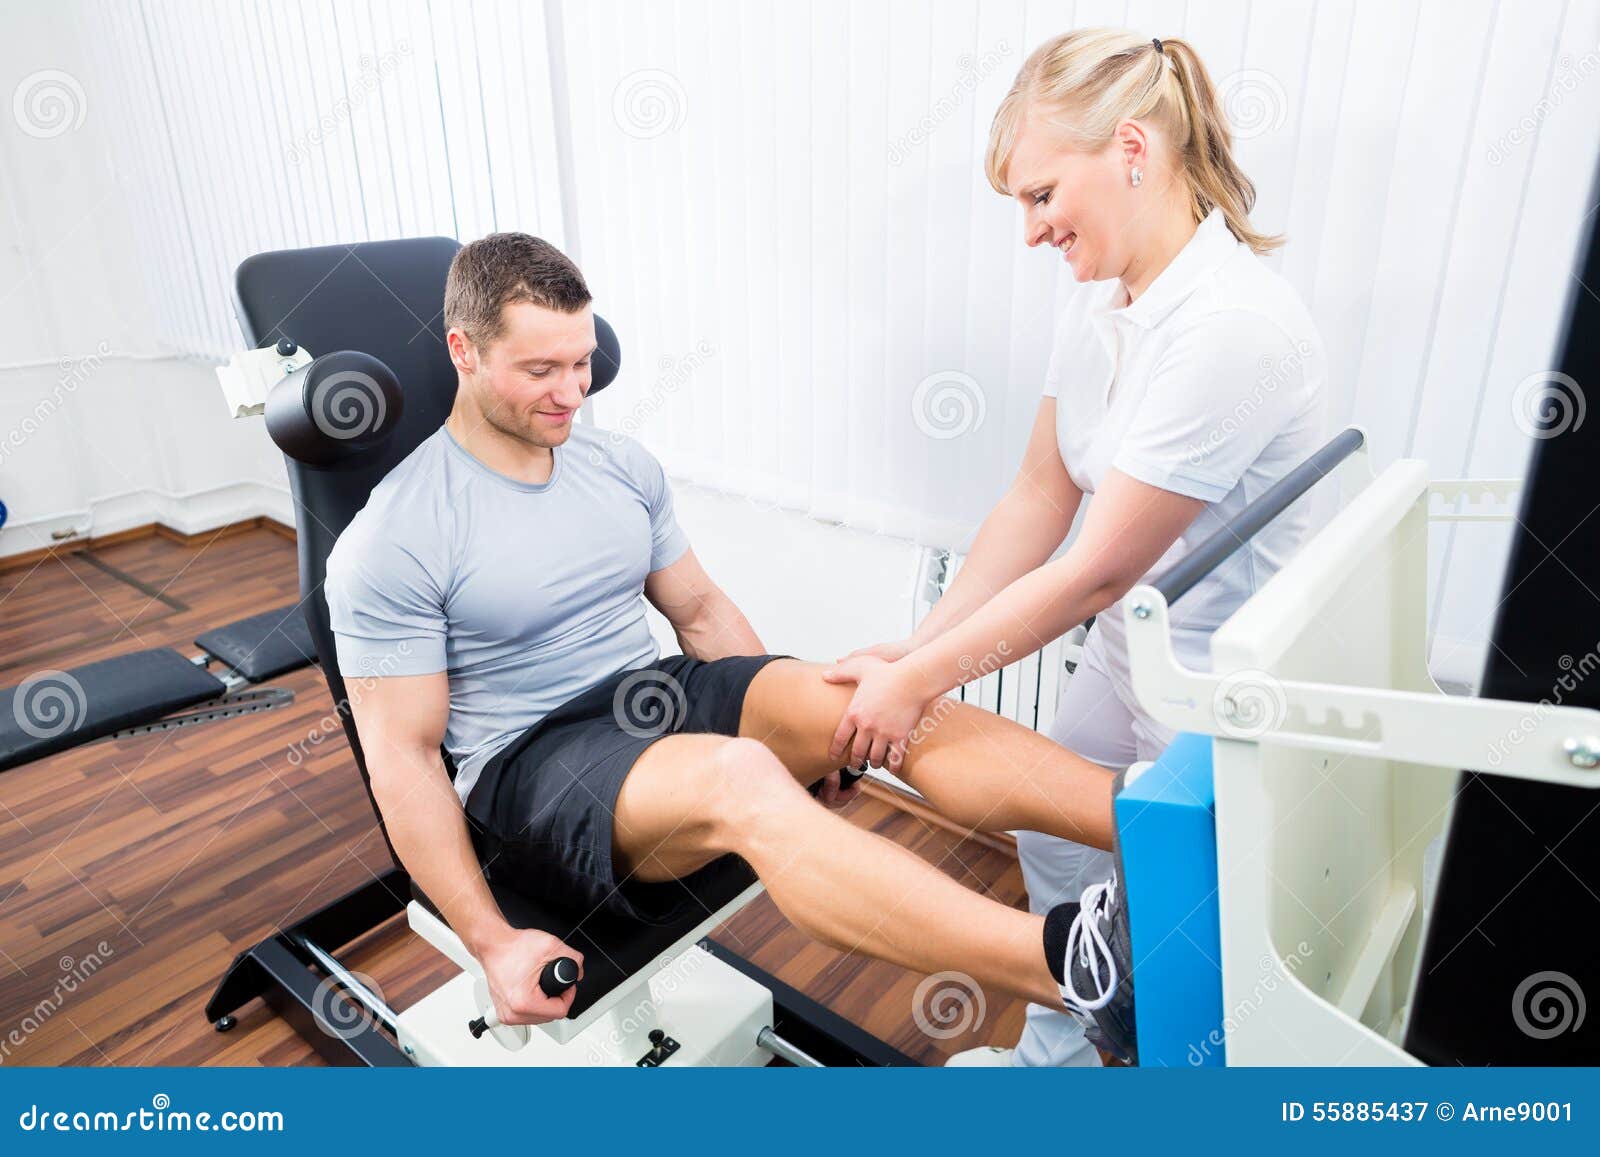 Young Woman In Underwear Using The Leg Press Machine At A Healthy